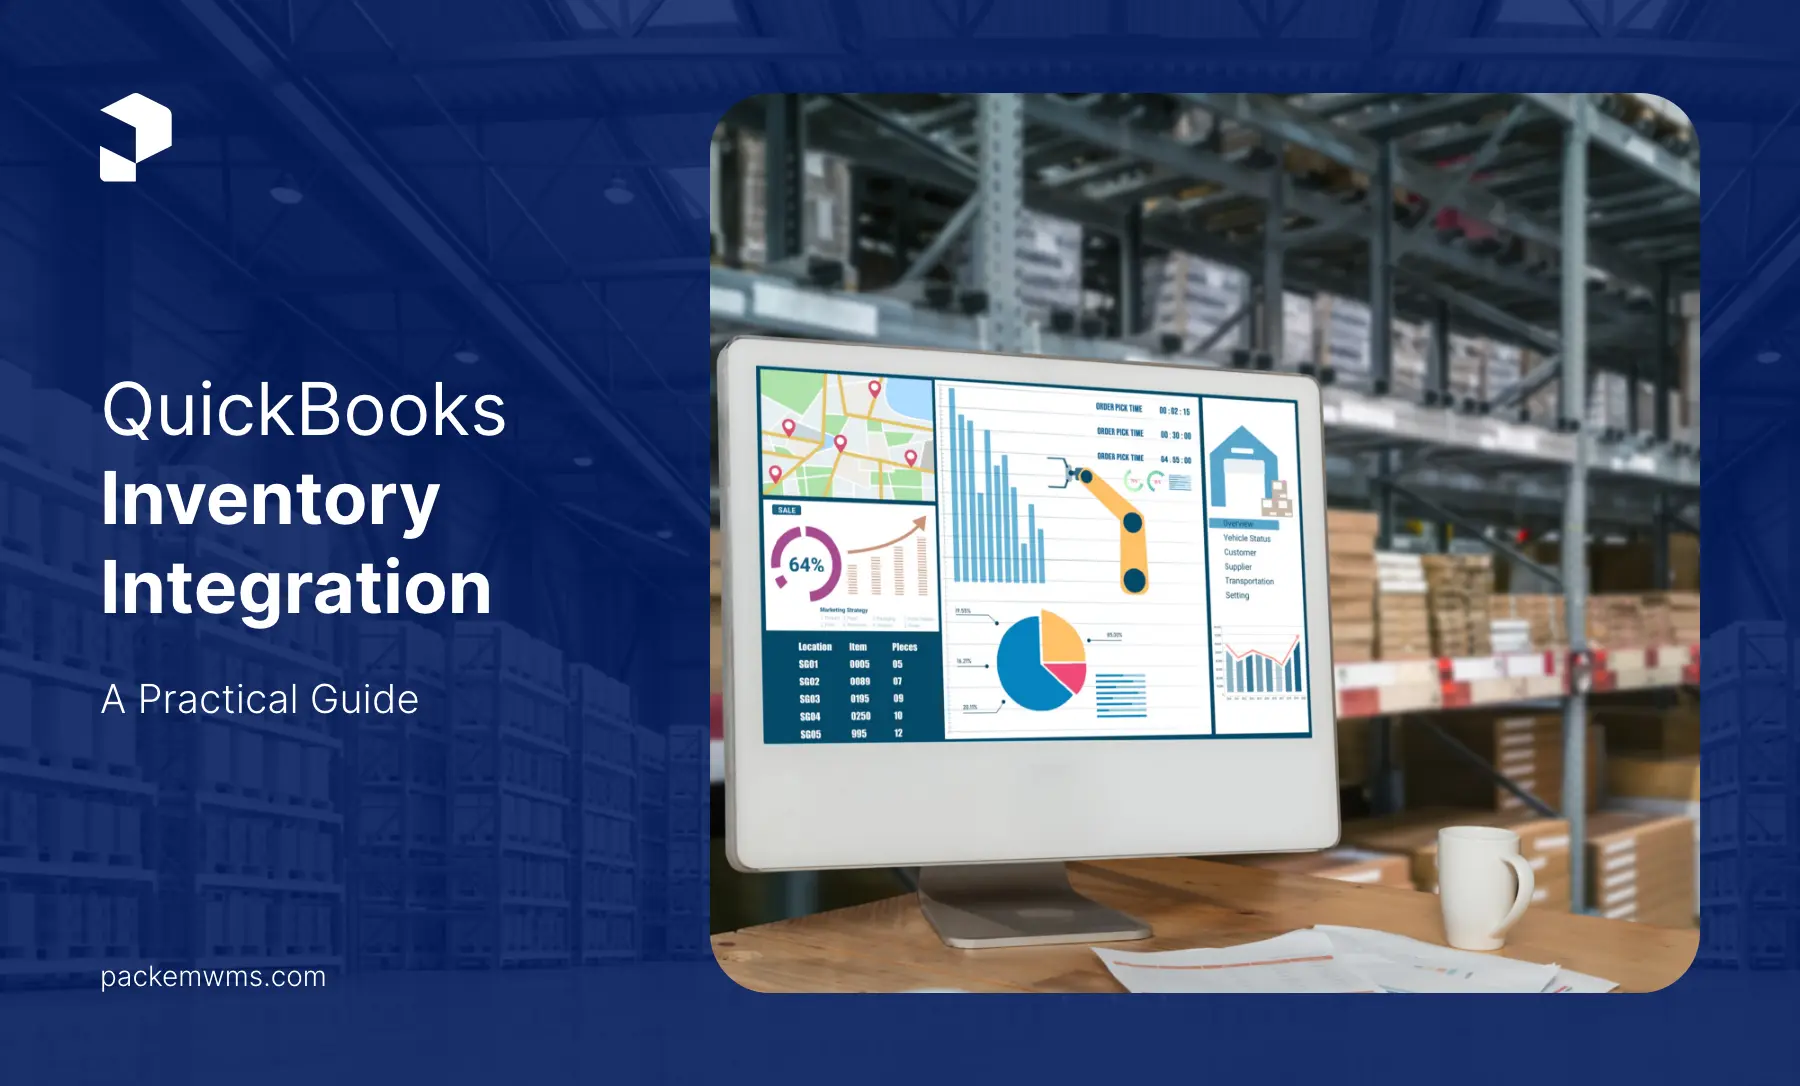 QuickBooks Inventory Integration A Practical Guide